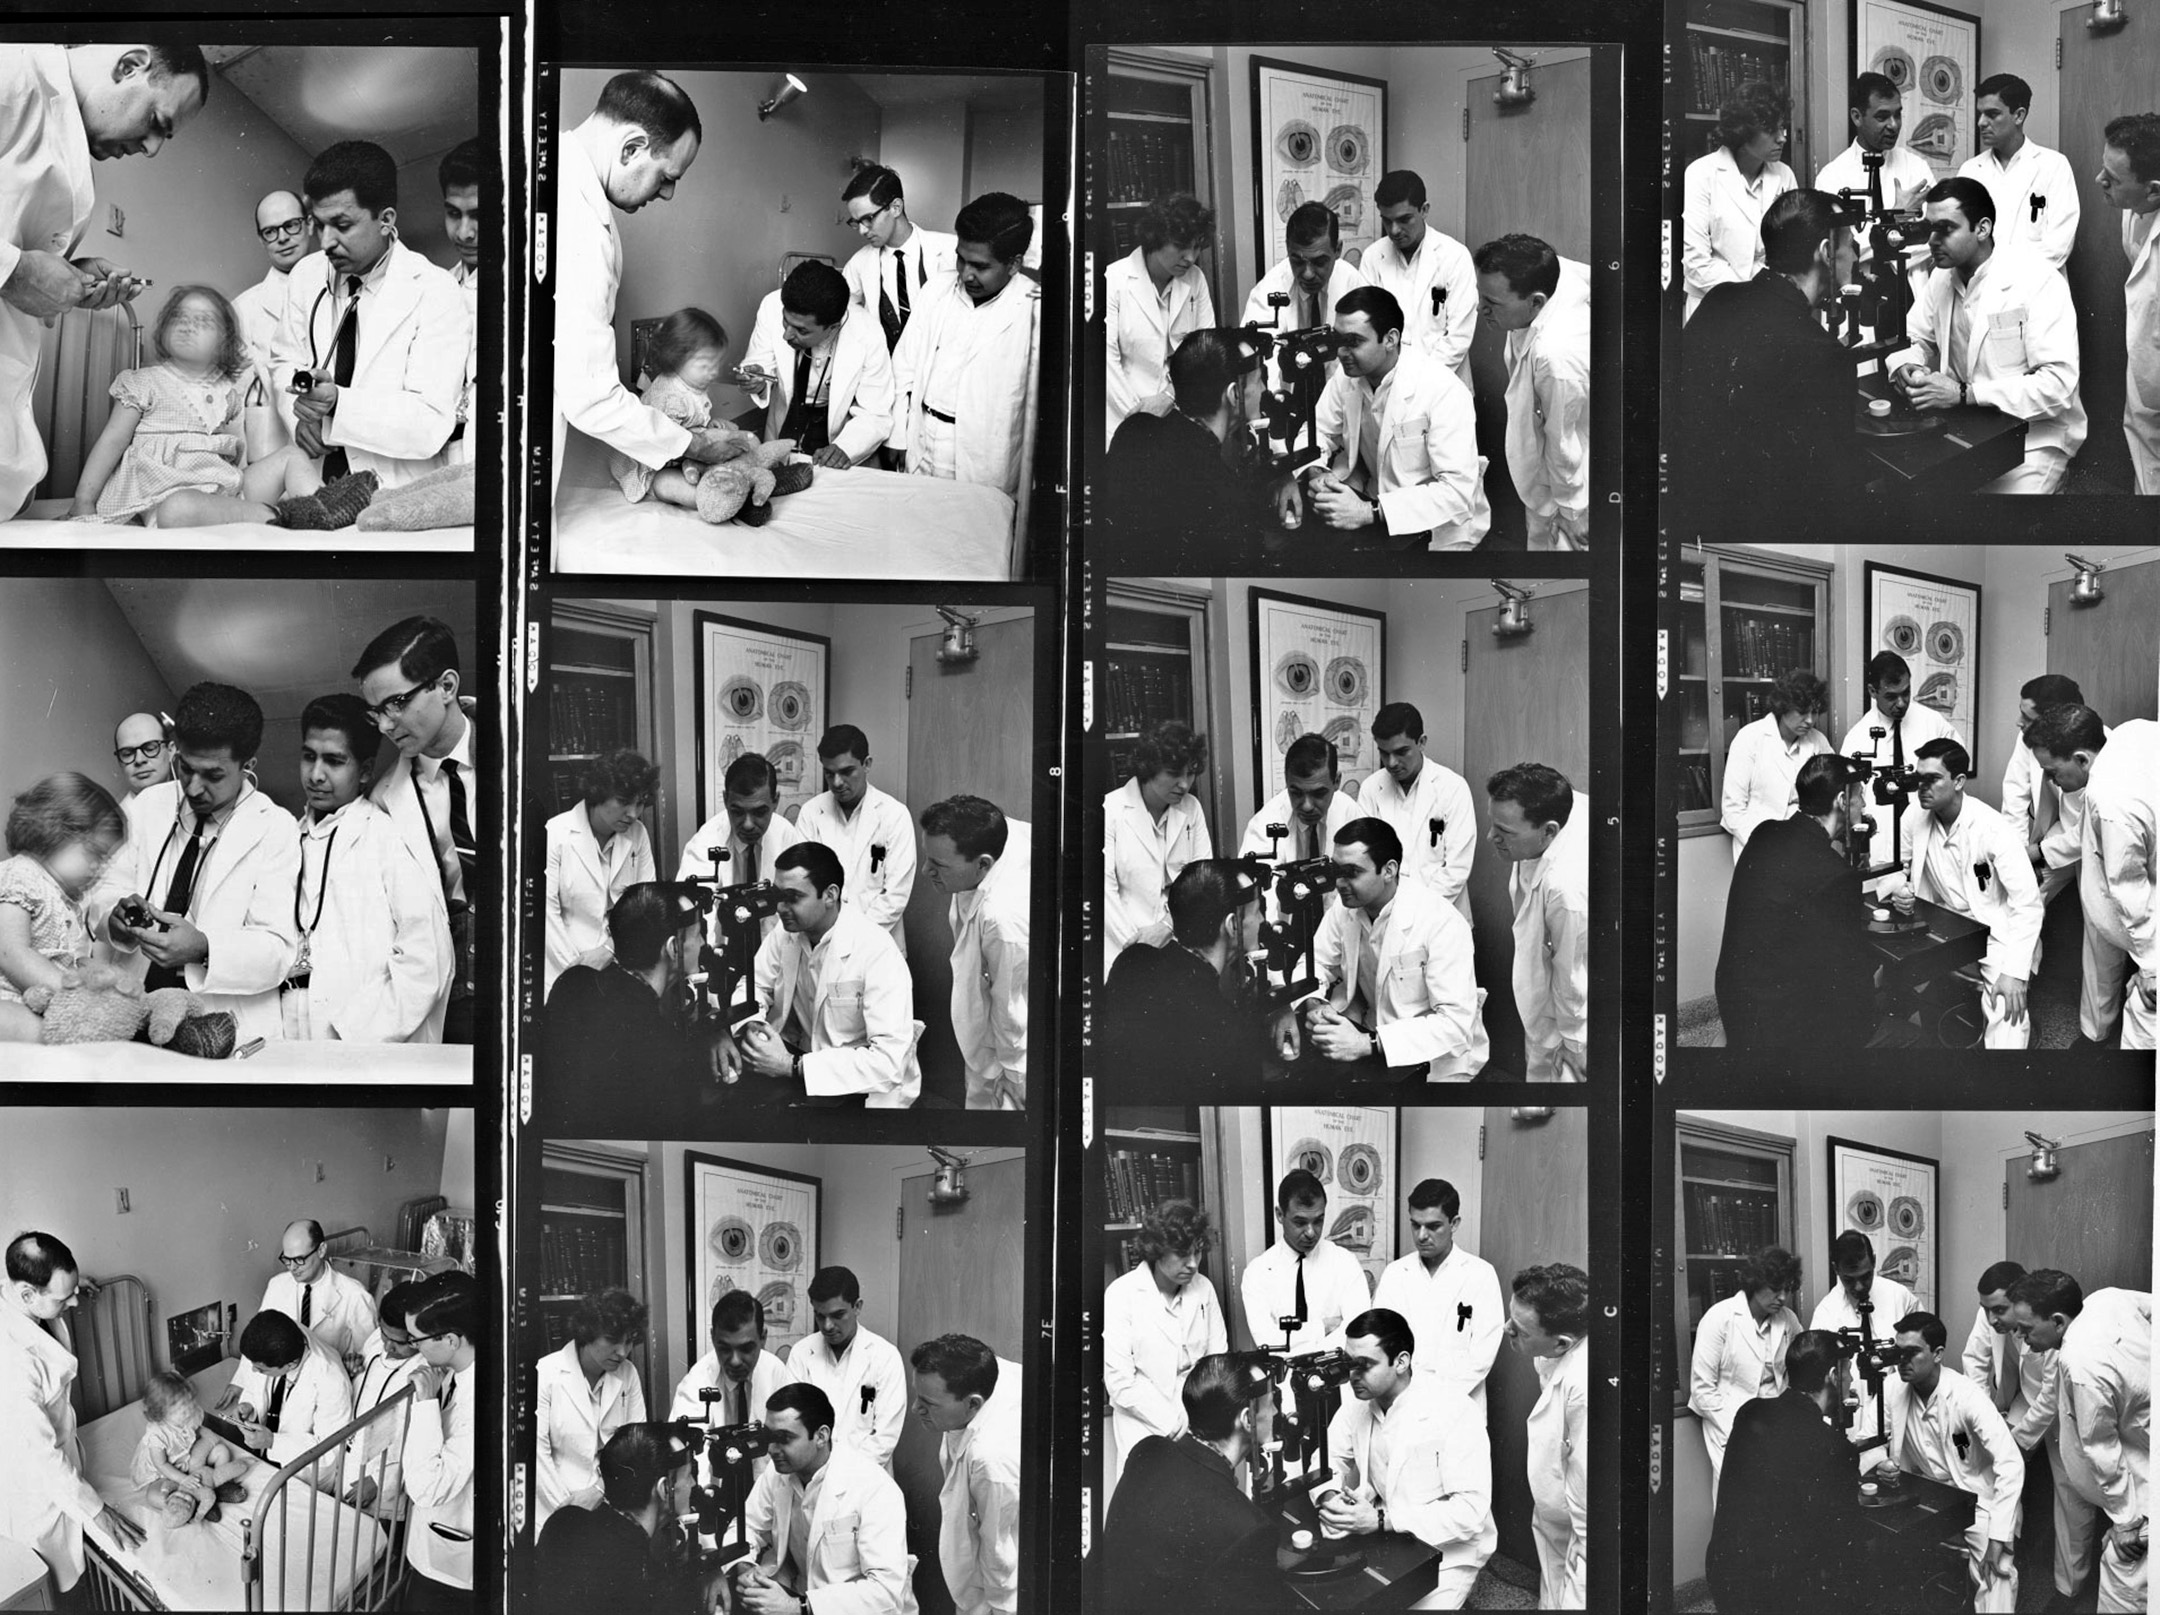 Contact sheet showing ophtalmology clinic with students at 2 separate sites